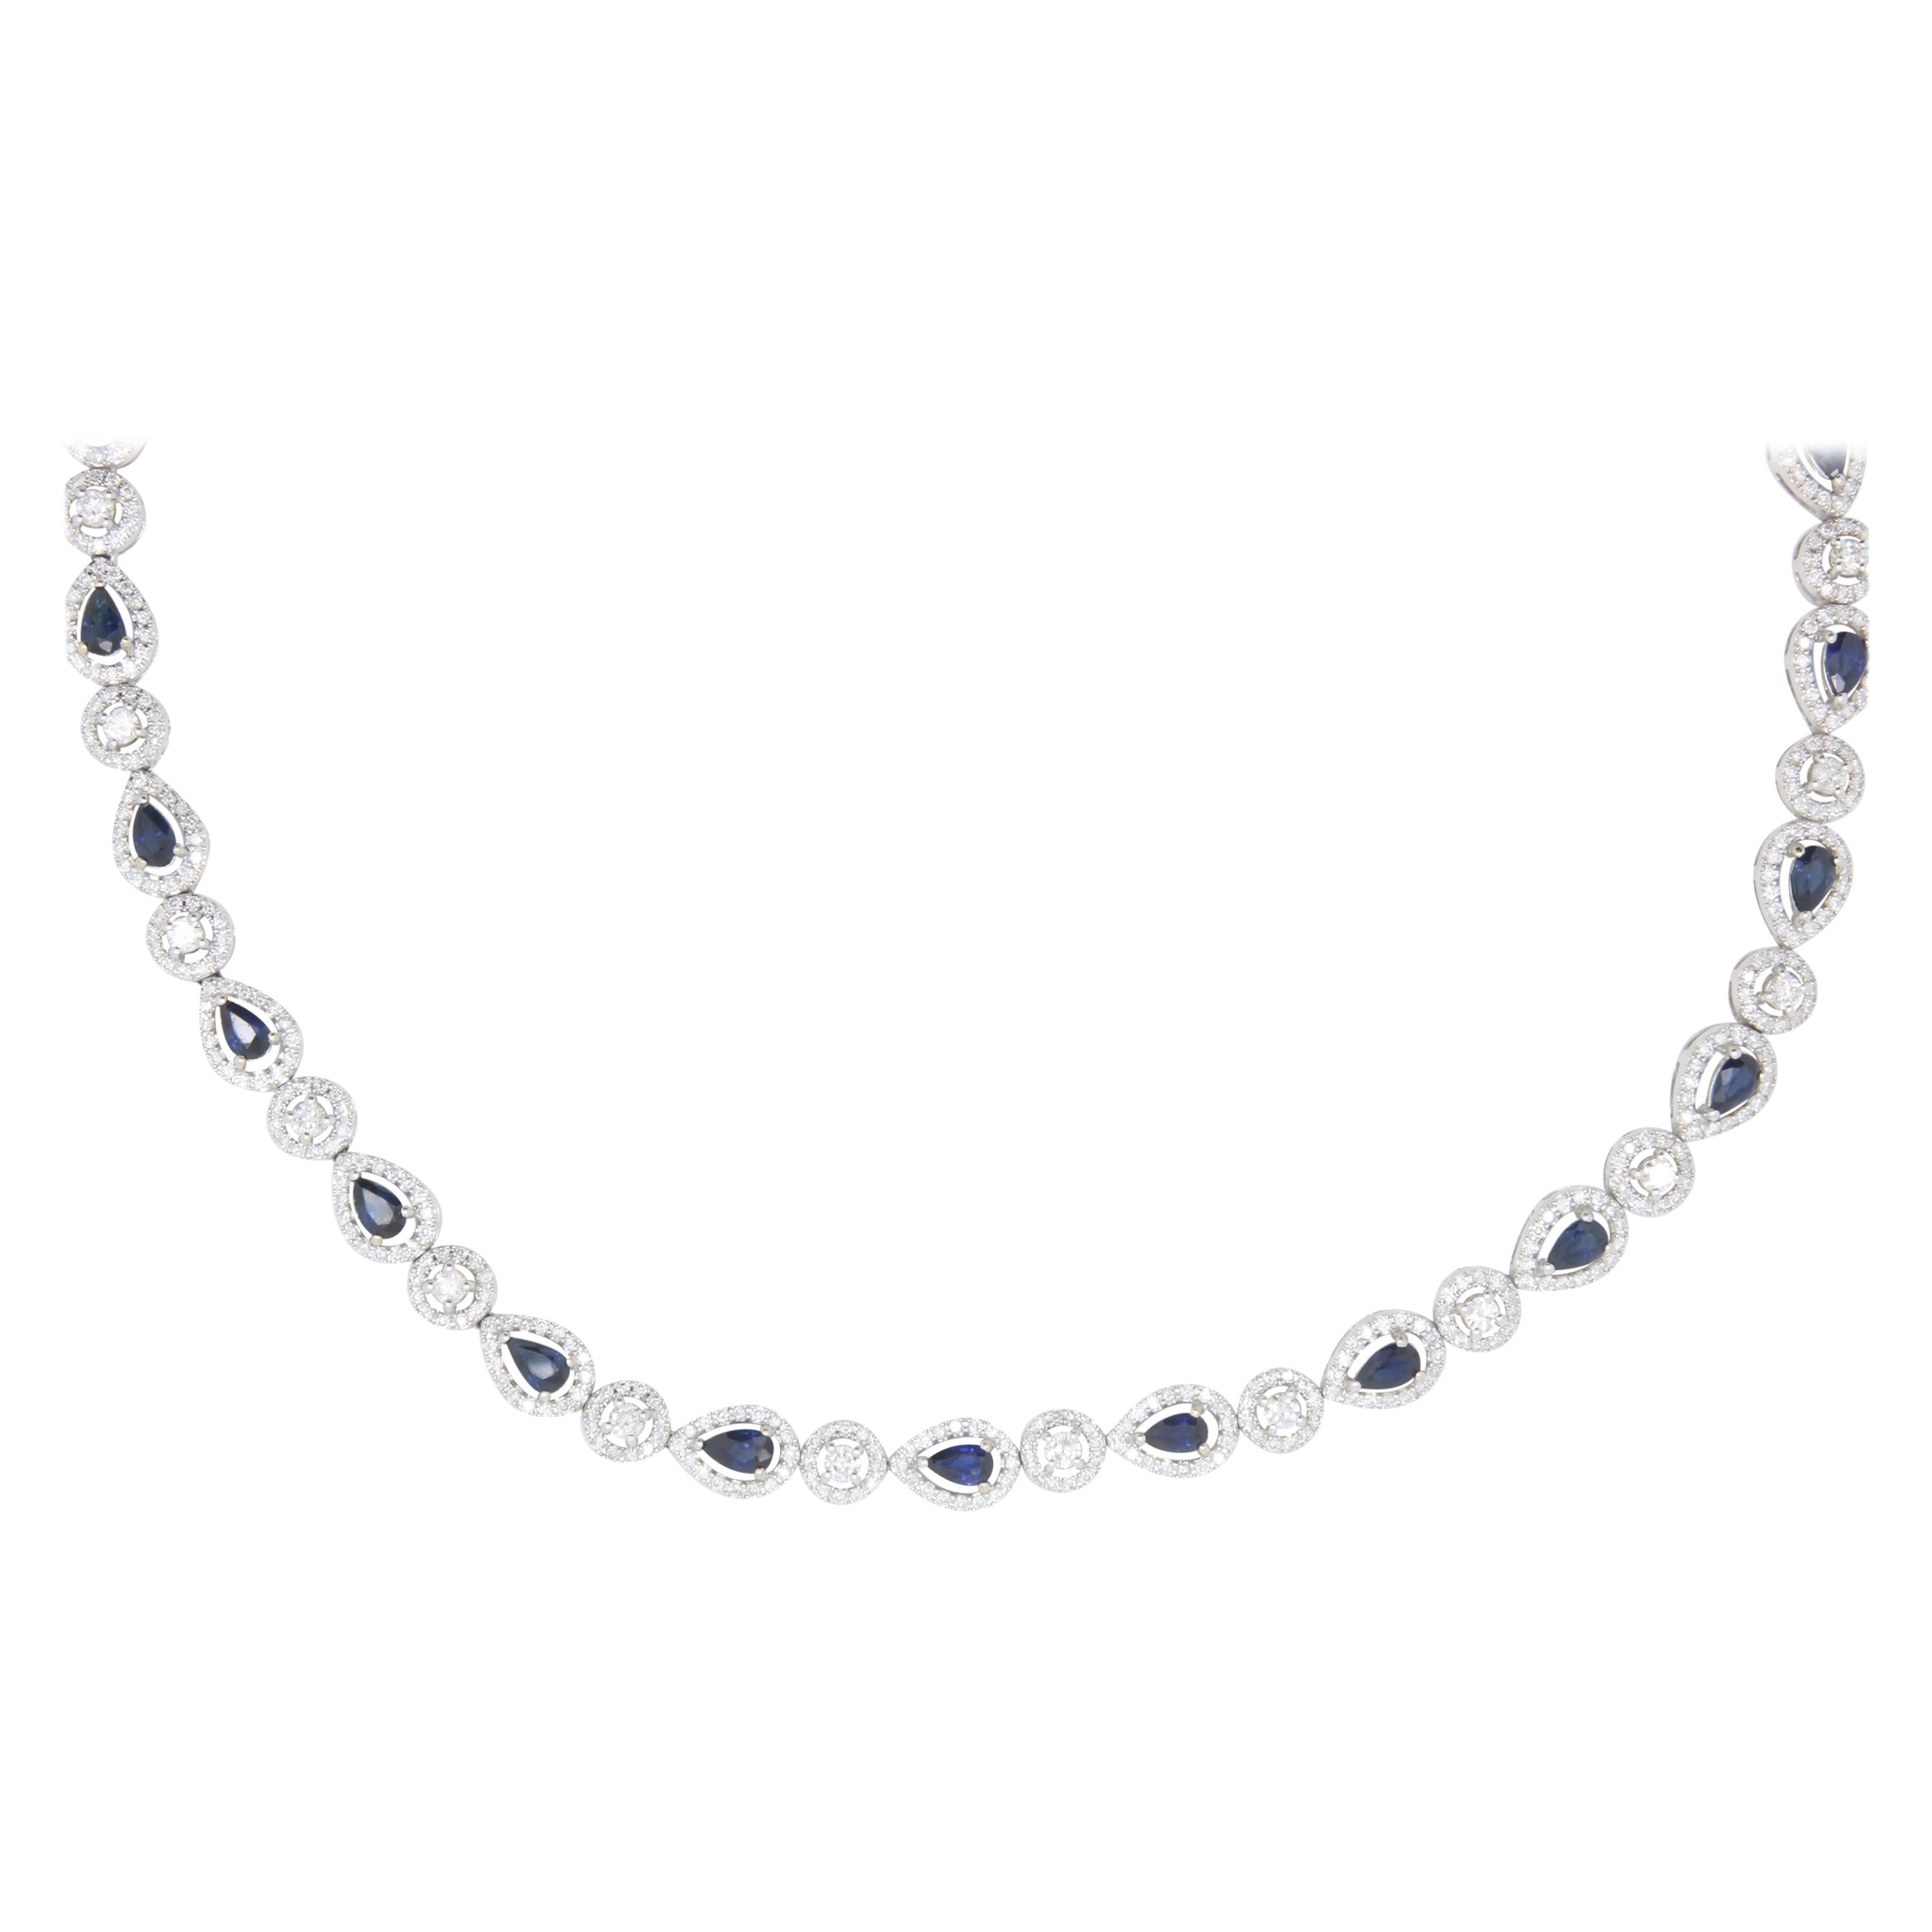 12.18 Ct Pear Shaped Sapphire and 9.64 Ct White Diamond Opera Necklace 18K Gold For Sale